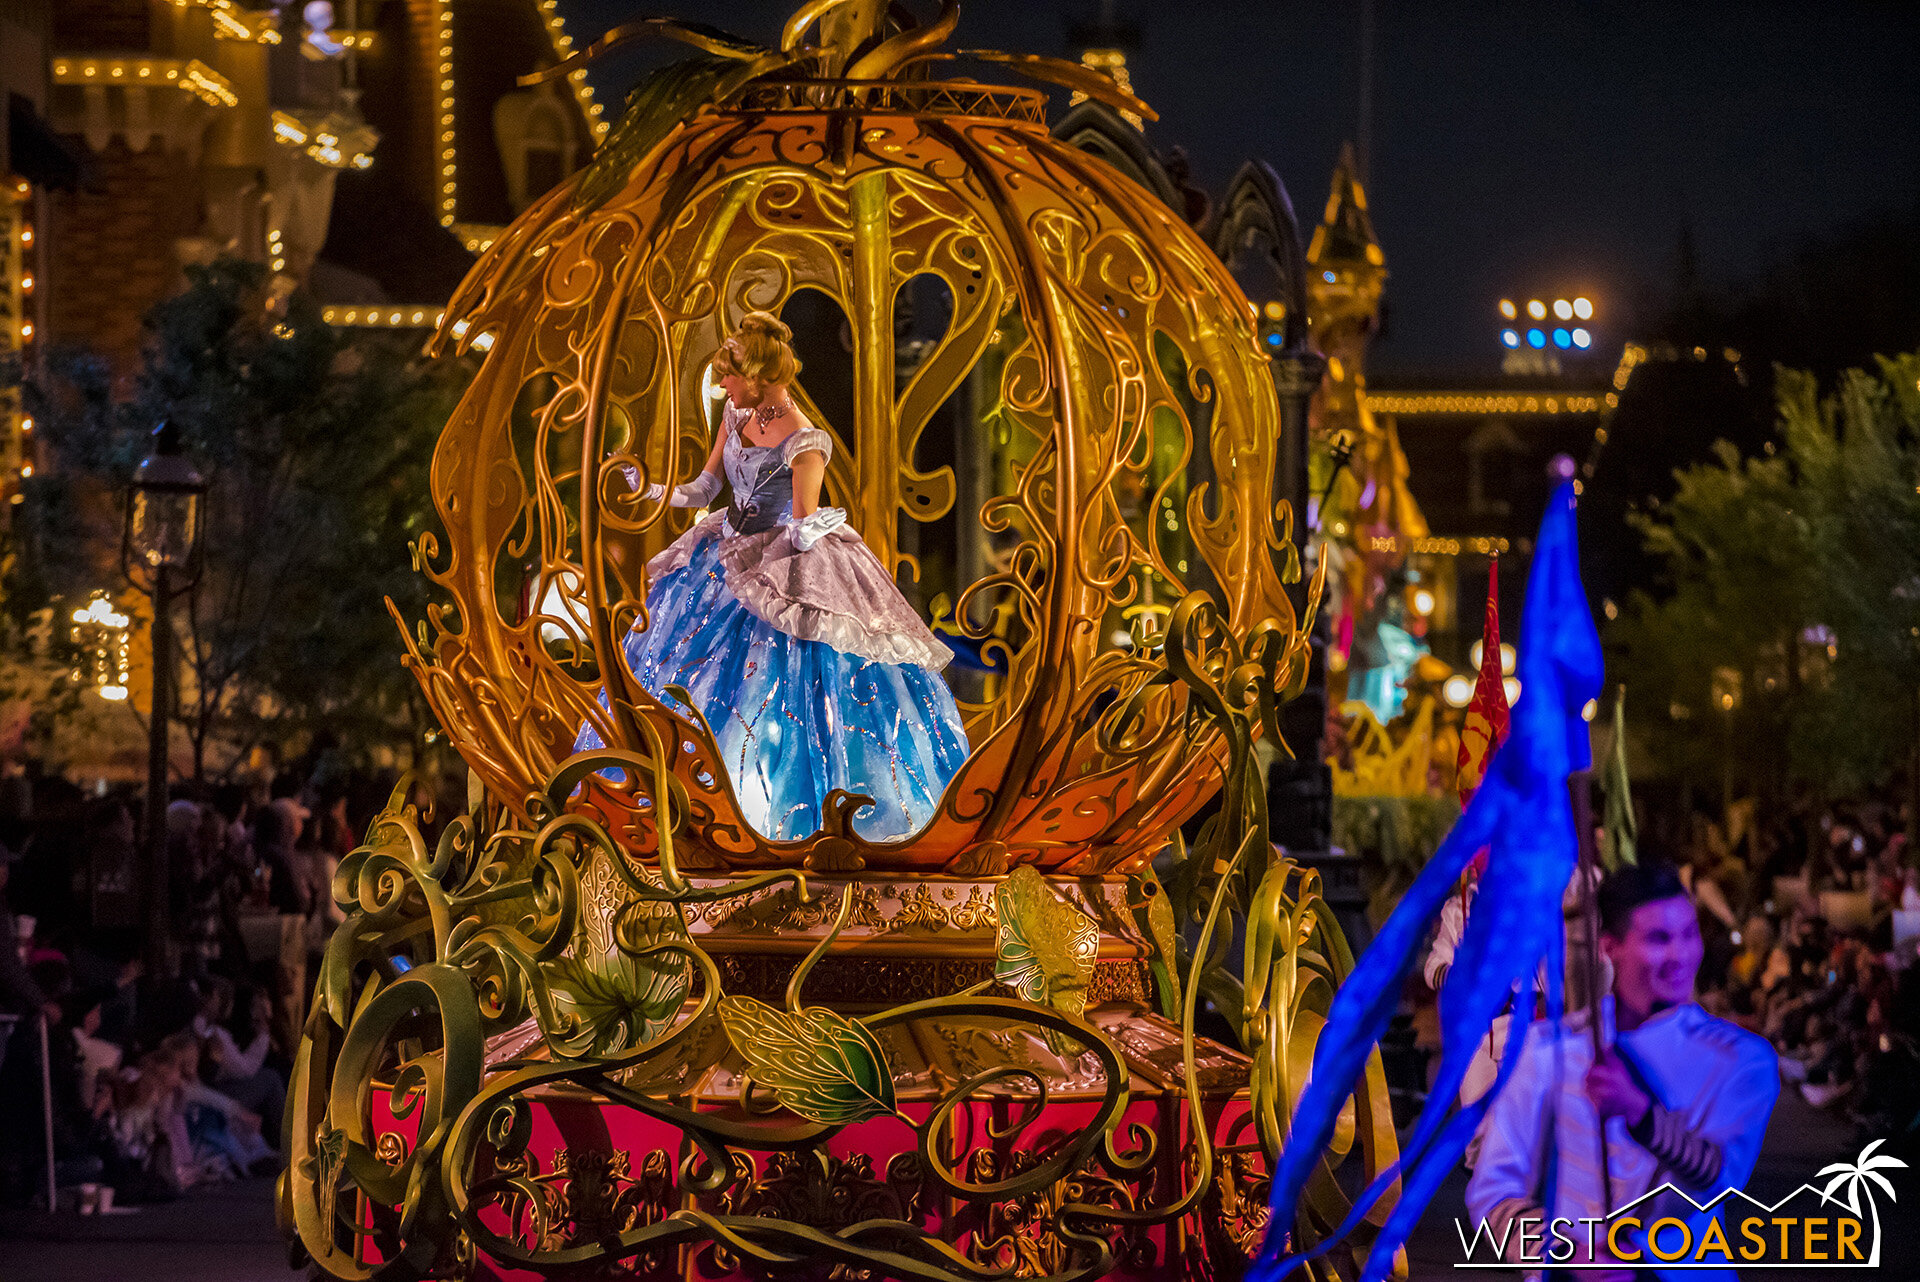  It’s not quite midnight yet, which means Cinderella’s still safe in her carriage! 